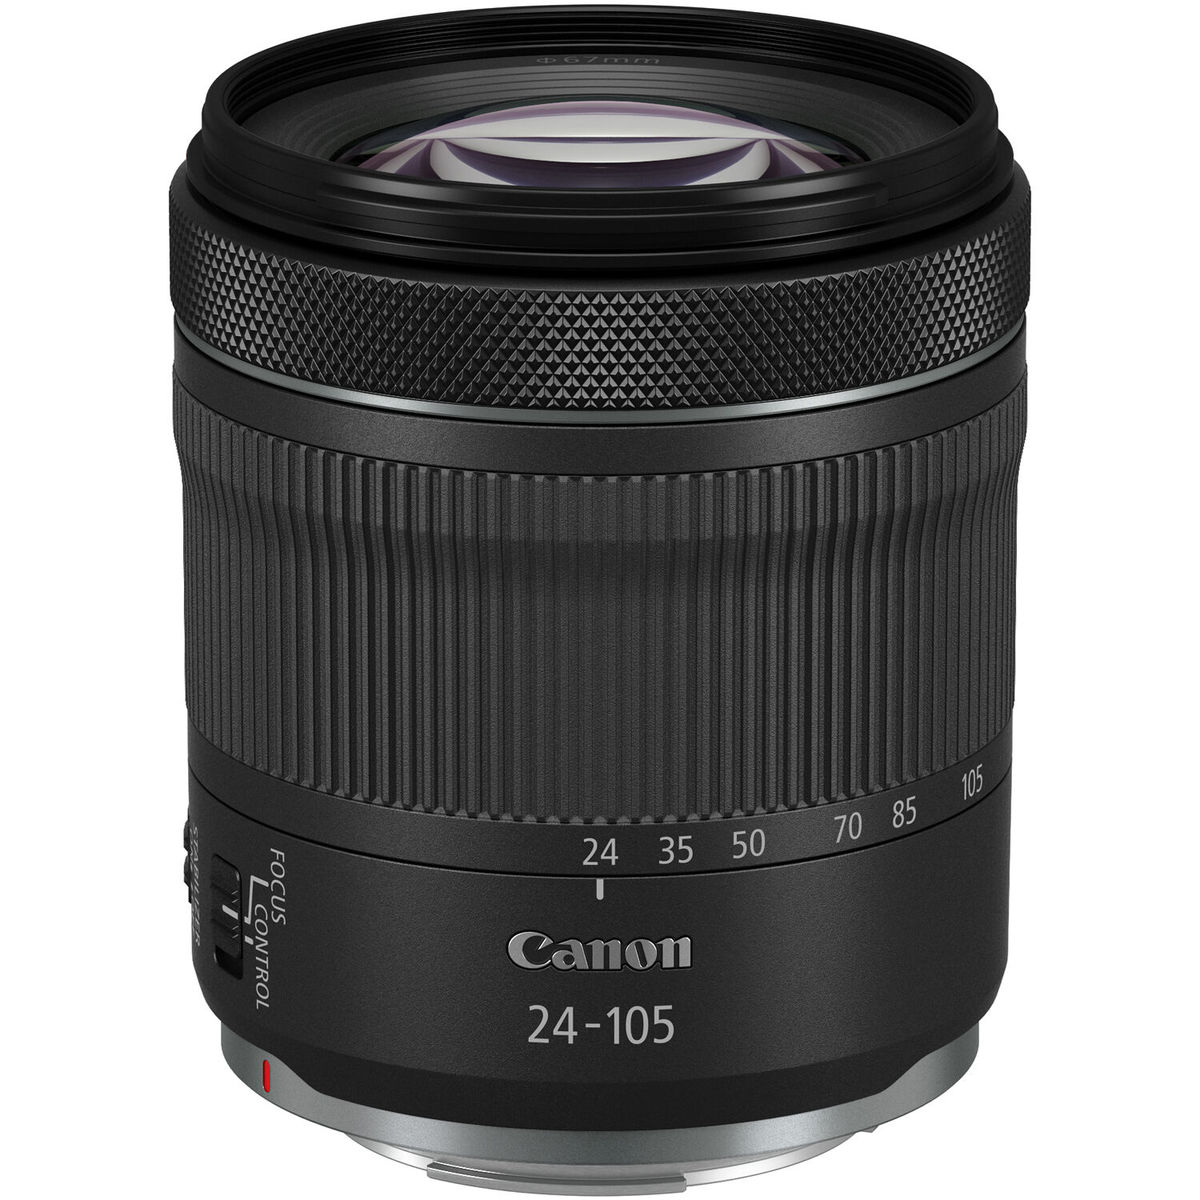 1. Canon RF 24-105mm F4-7.1 IS STM